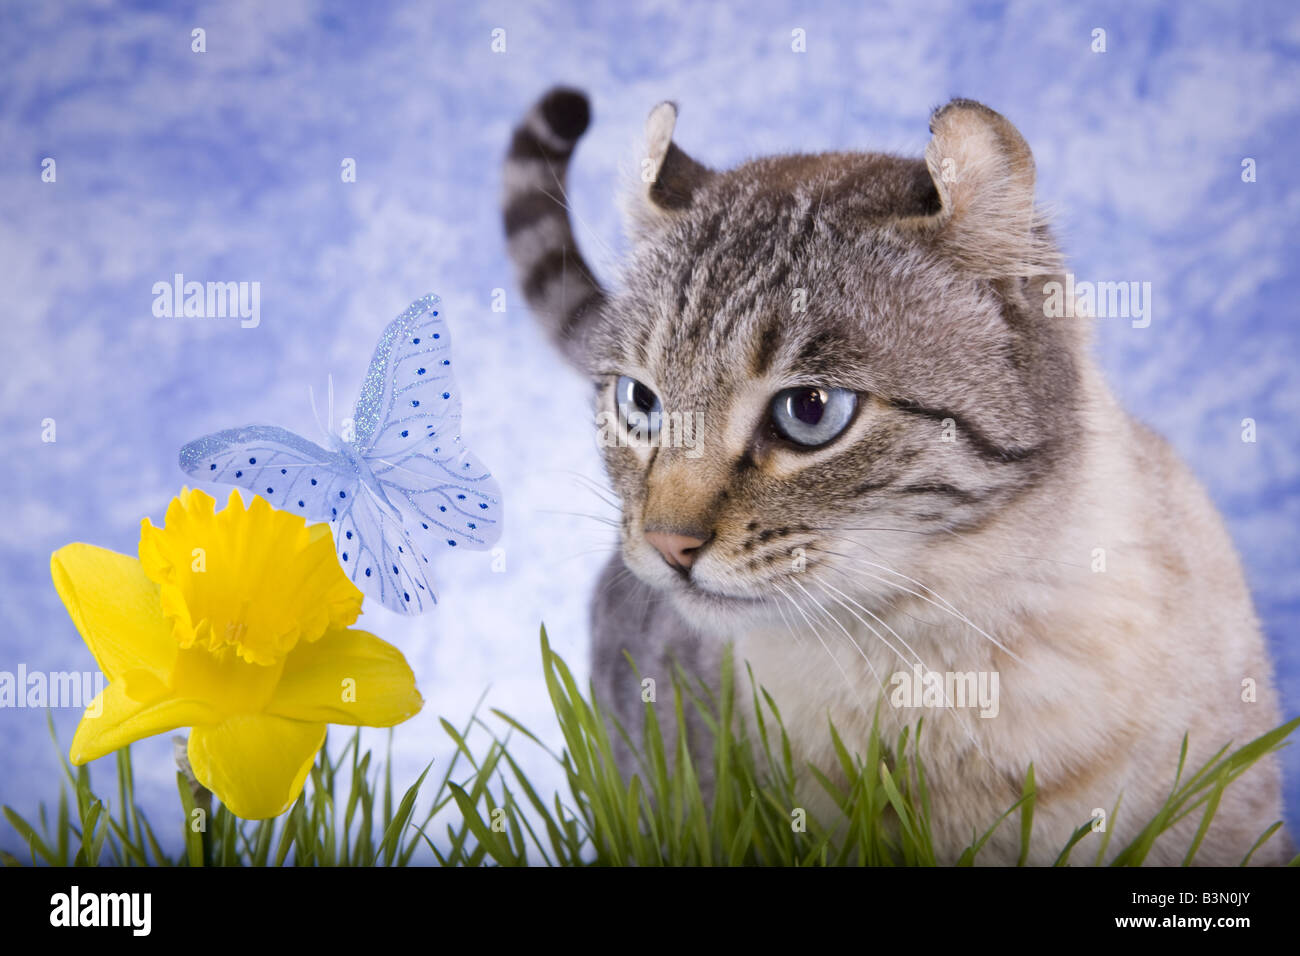 Cat in the garden on blue sky background with grass looking at yellow daffodil flower that has a blue butterfy on it Stock Photo